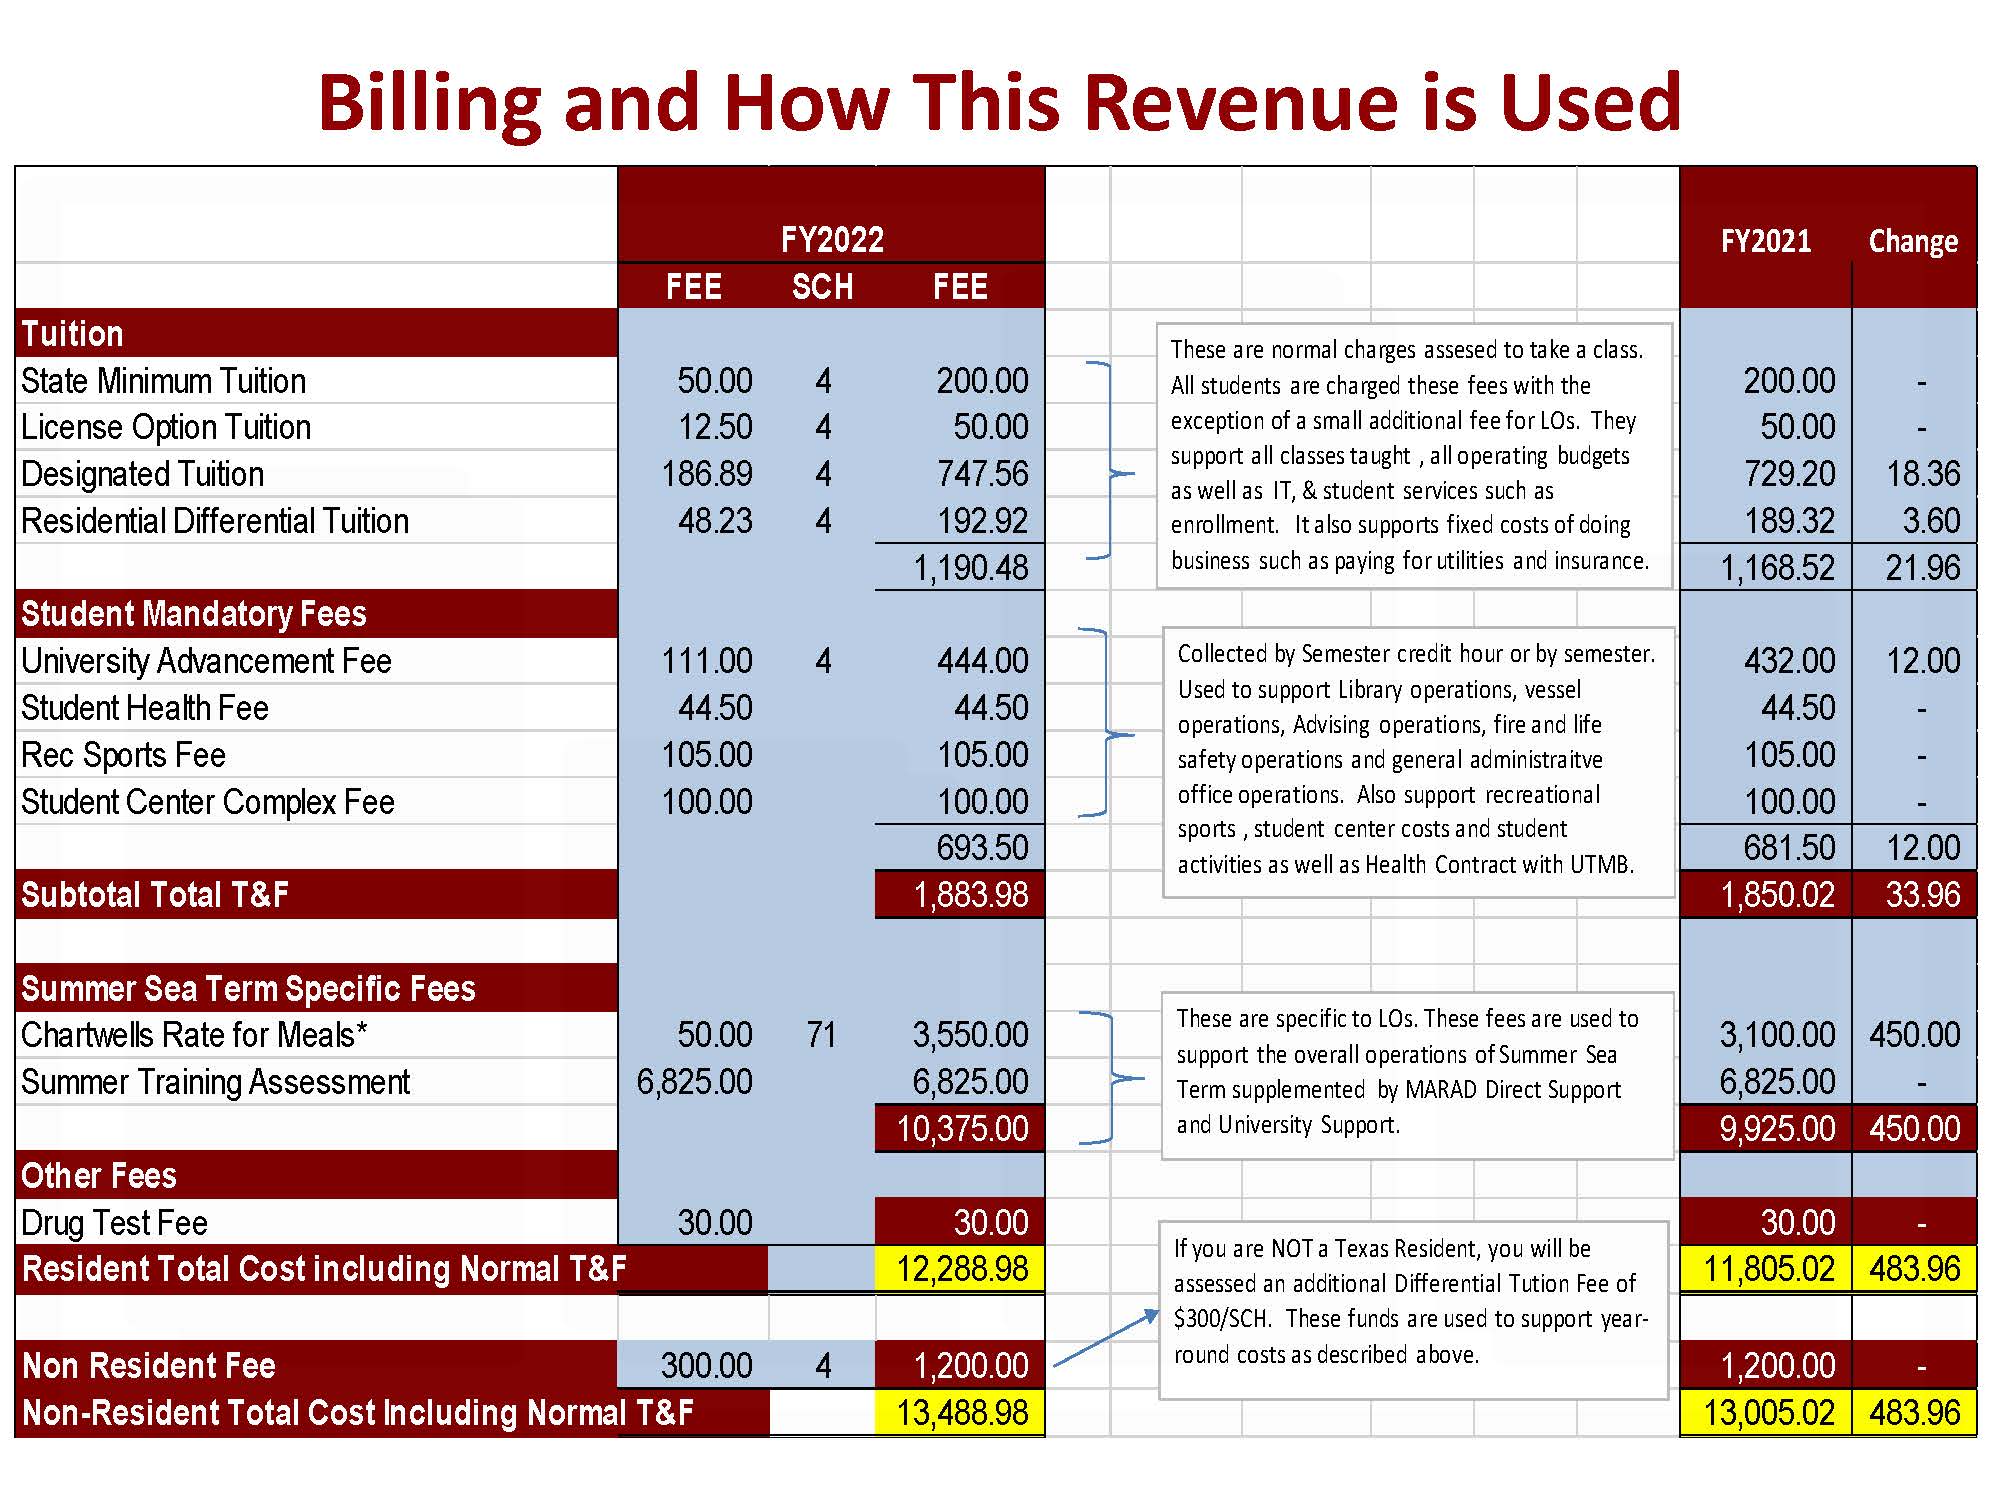 TAMMA Billing & How the Revenue is Used